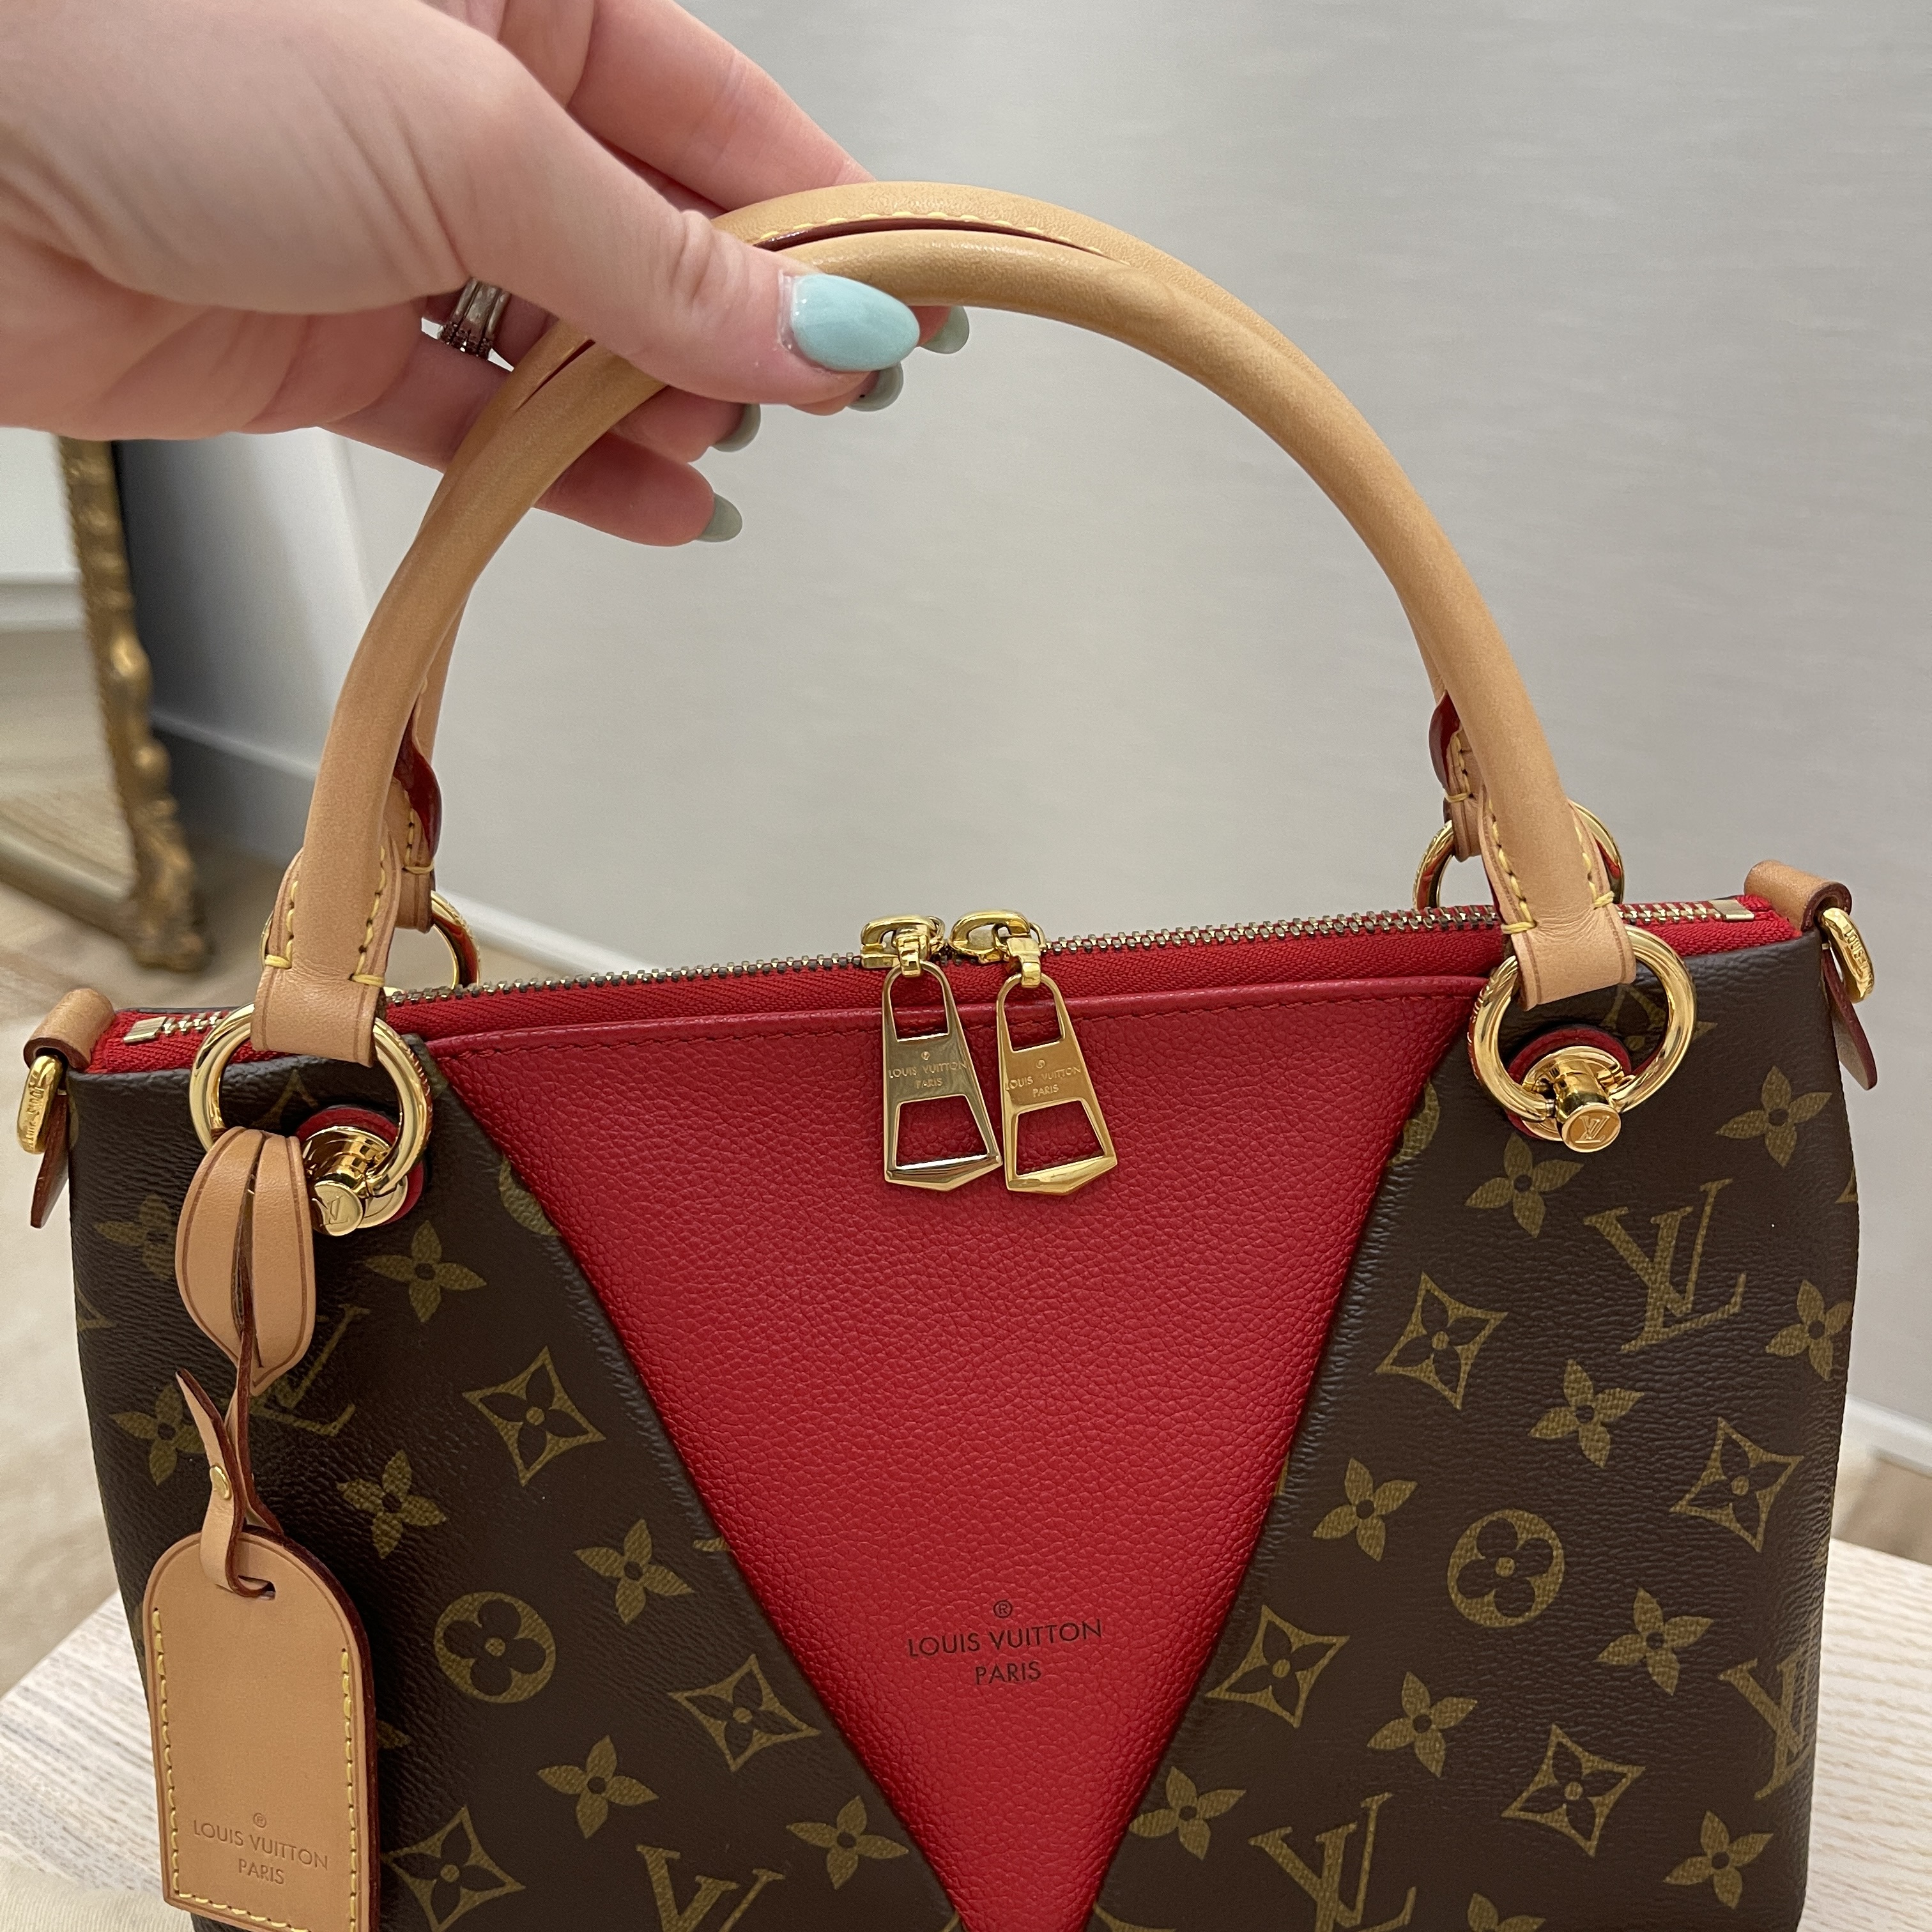 red and brown louis vuitton purse